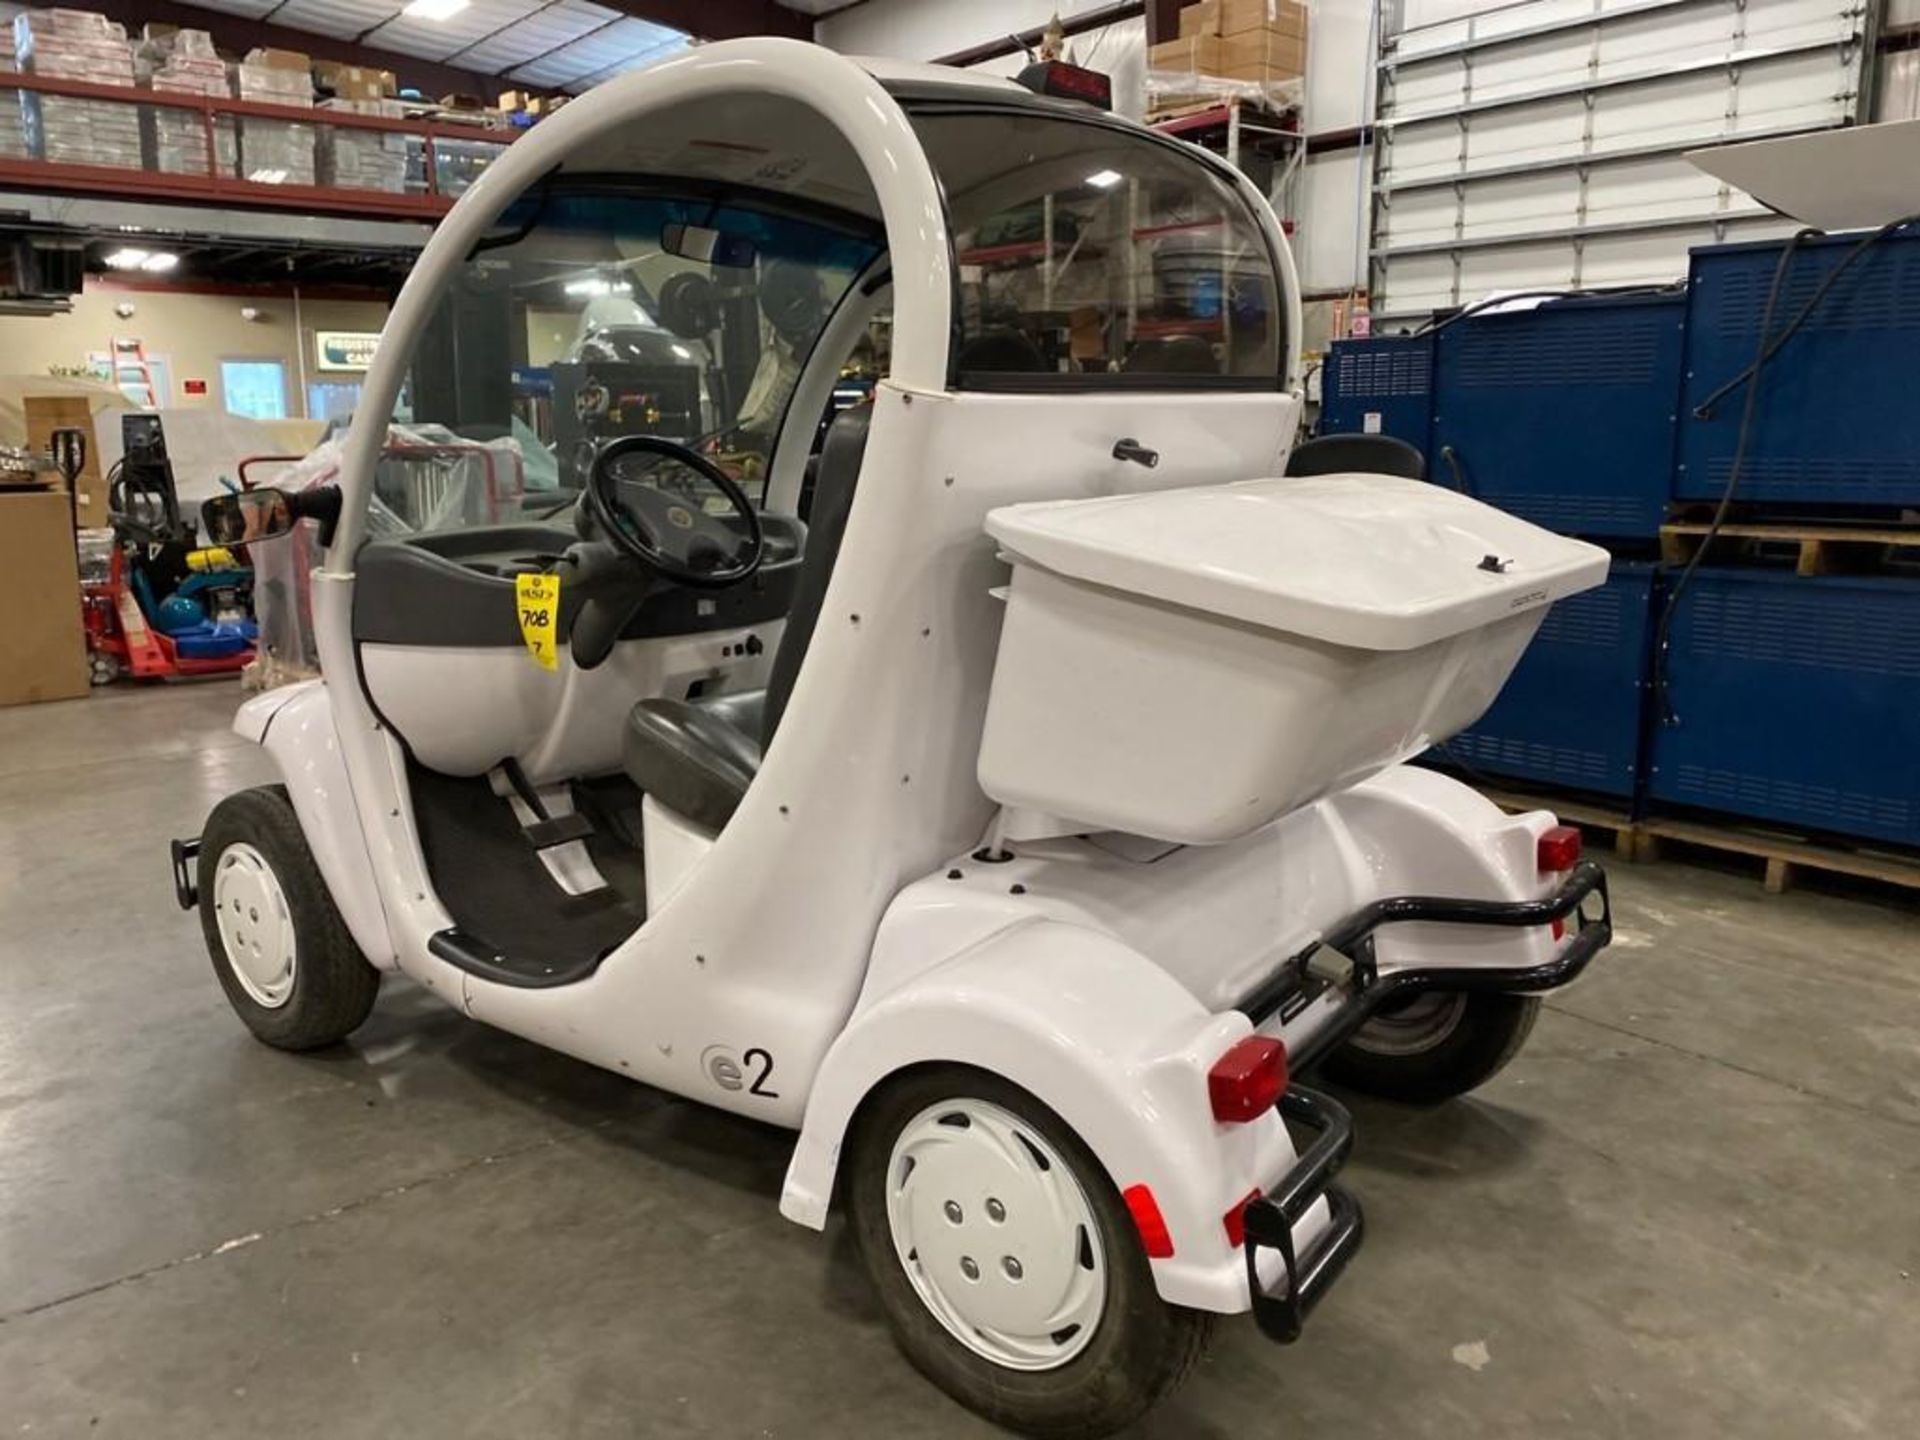 GEM ELECTRIC CART, SEATBELTS, 48V, RUNS AND OPERATES, LIGHTS, SIDE MIRRORS, ENCLOSED STORAGE - Image 5 of 7